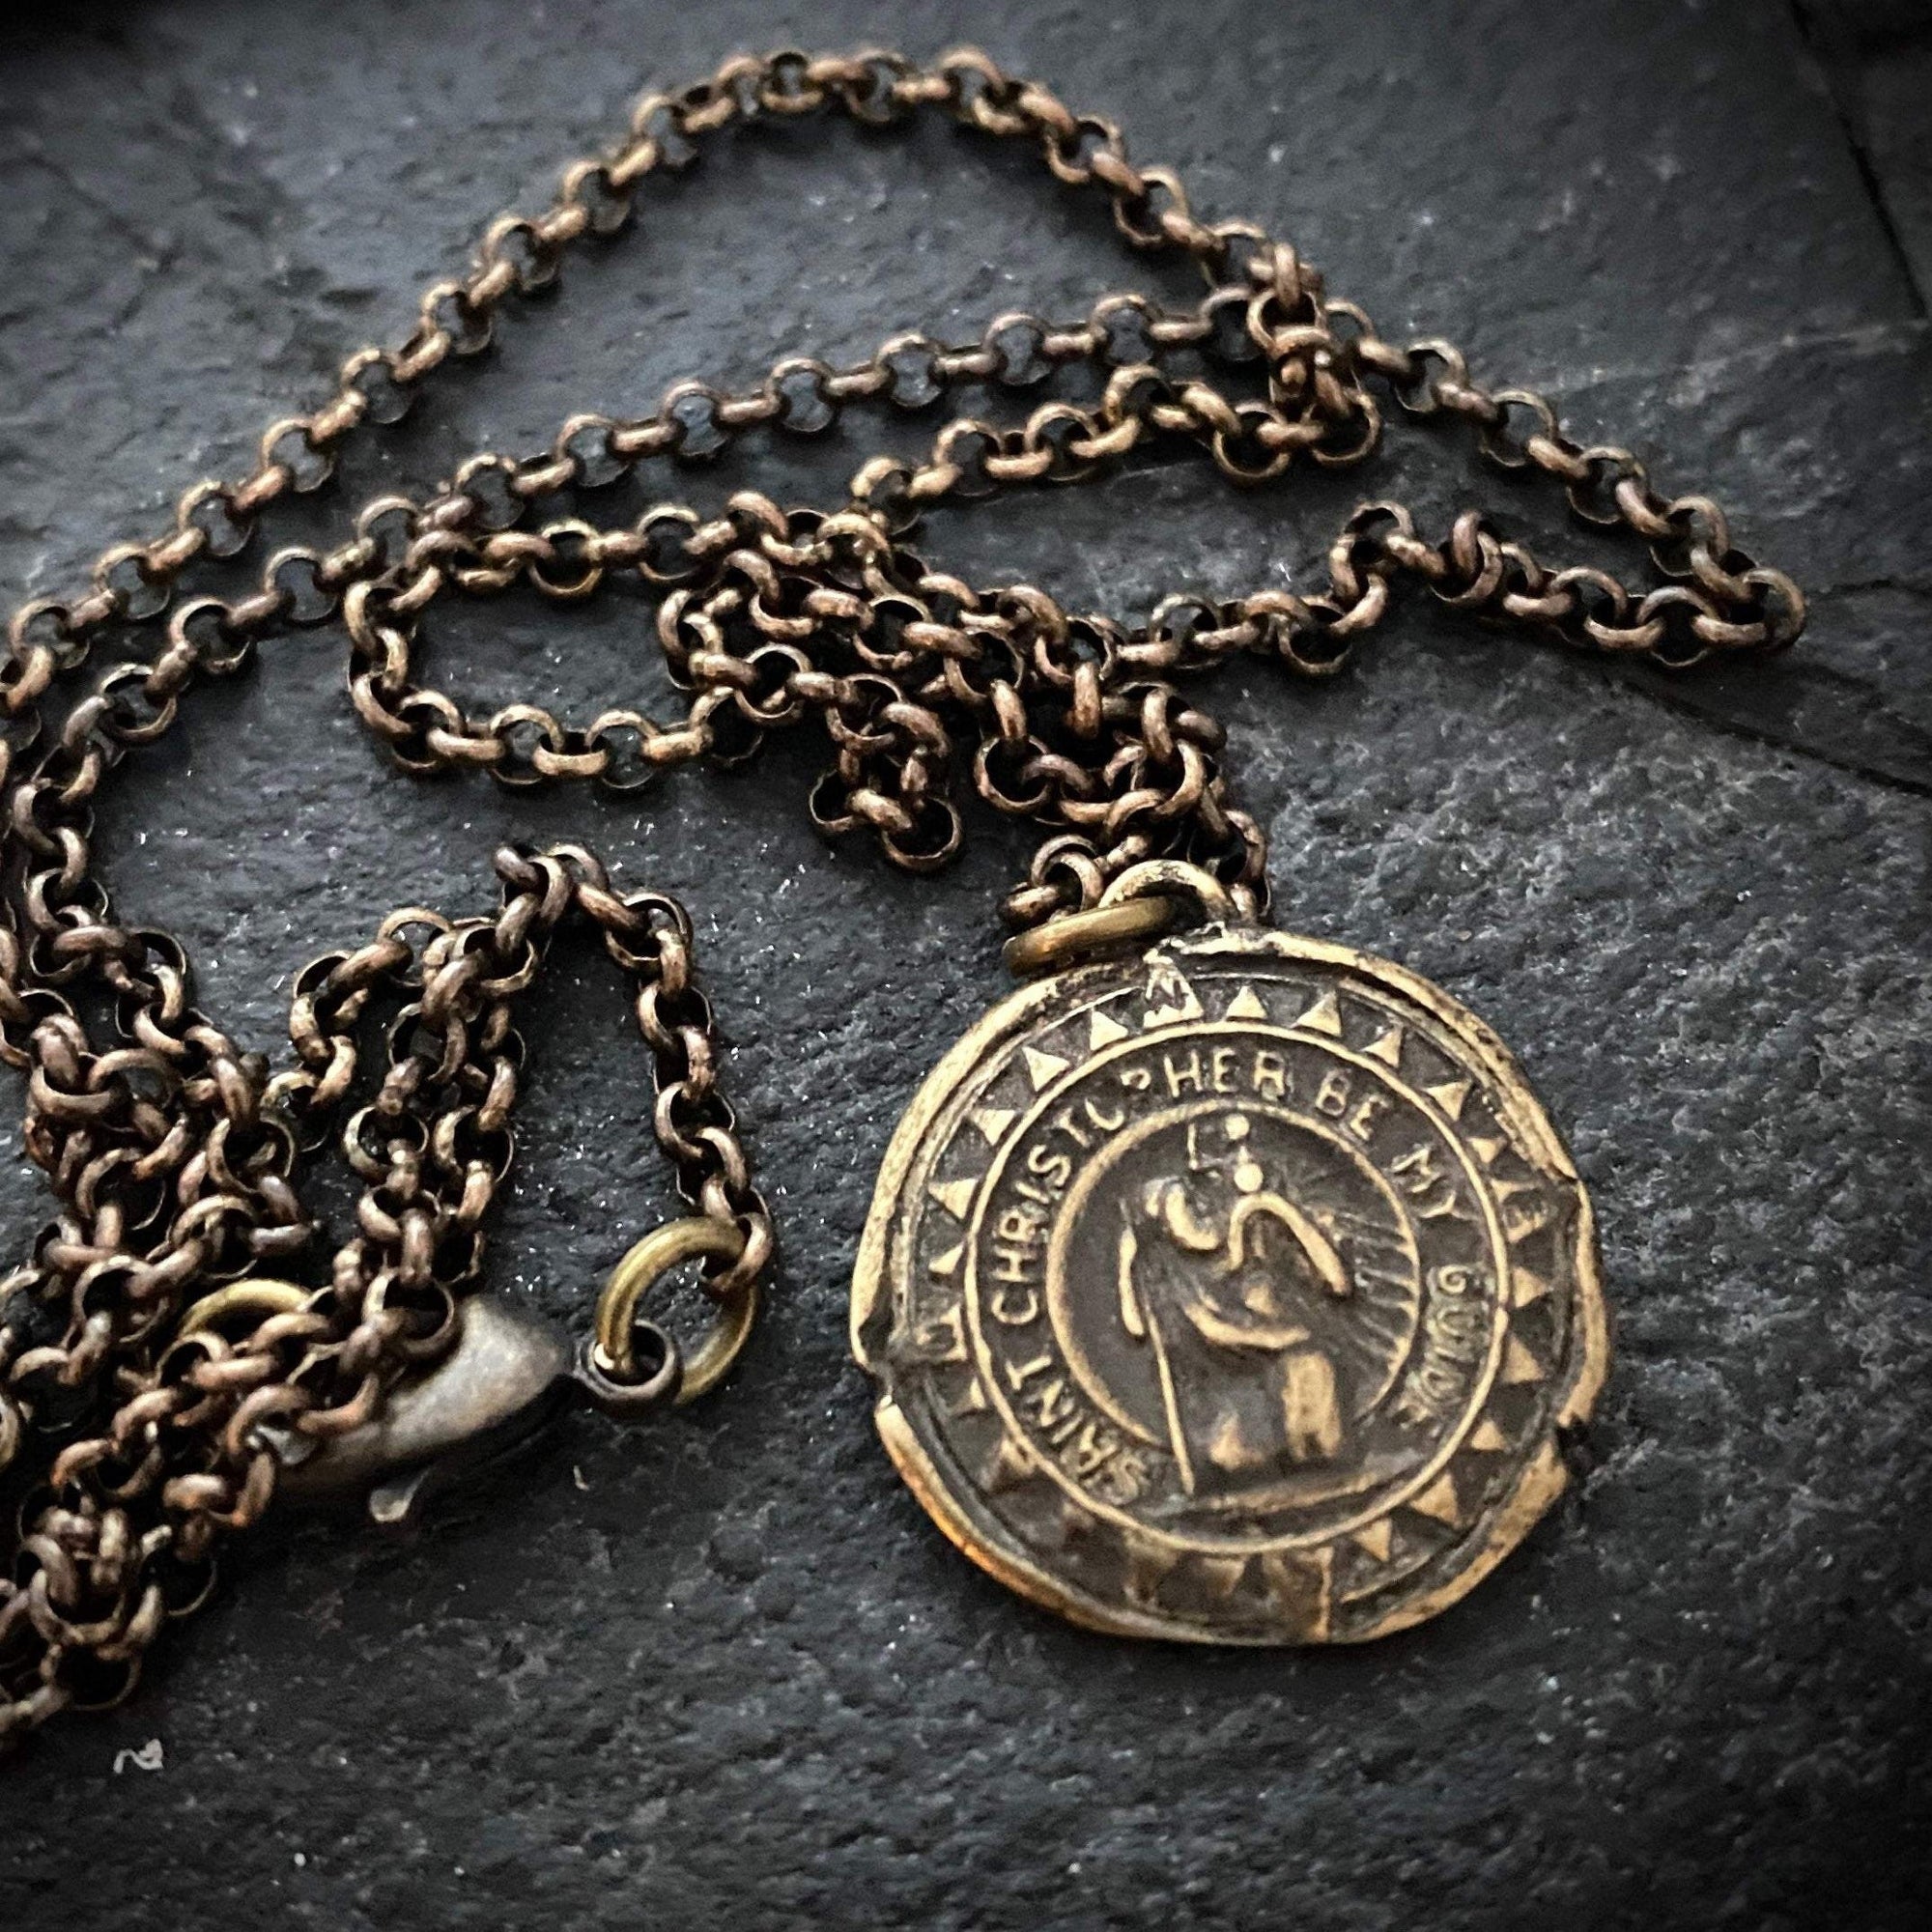 Men's Antiqued Brass Bronze Necklace with St. Christopher Medal, Unisex Necklace, Chain length 20 or 24 inches BR-035